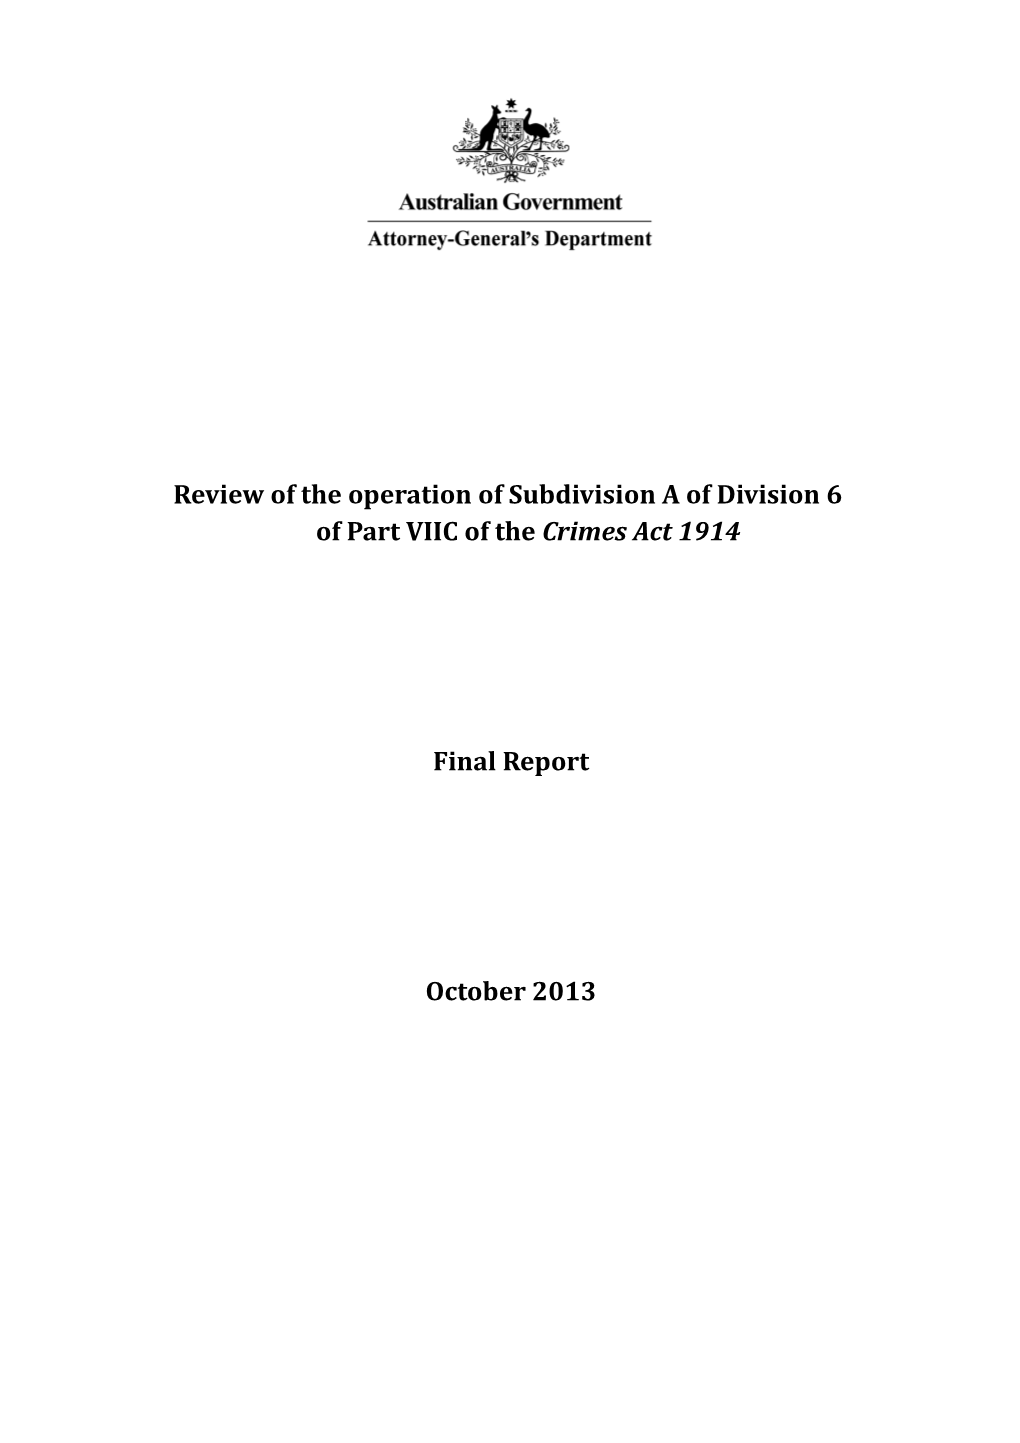 Final Report Review of the Operation of Subdivision a of Division 6 of Part VIIC of The